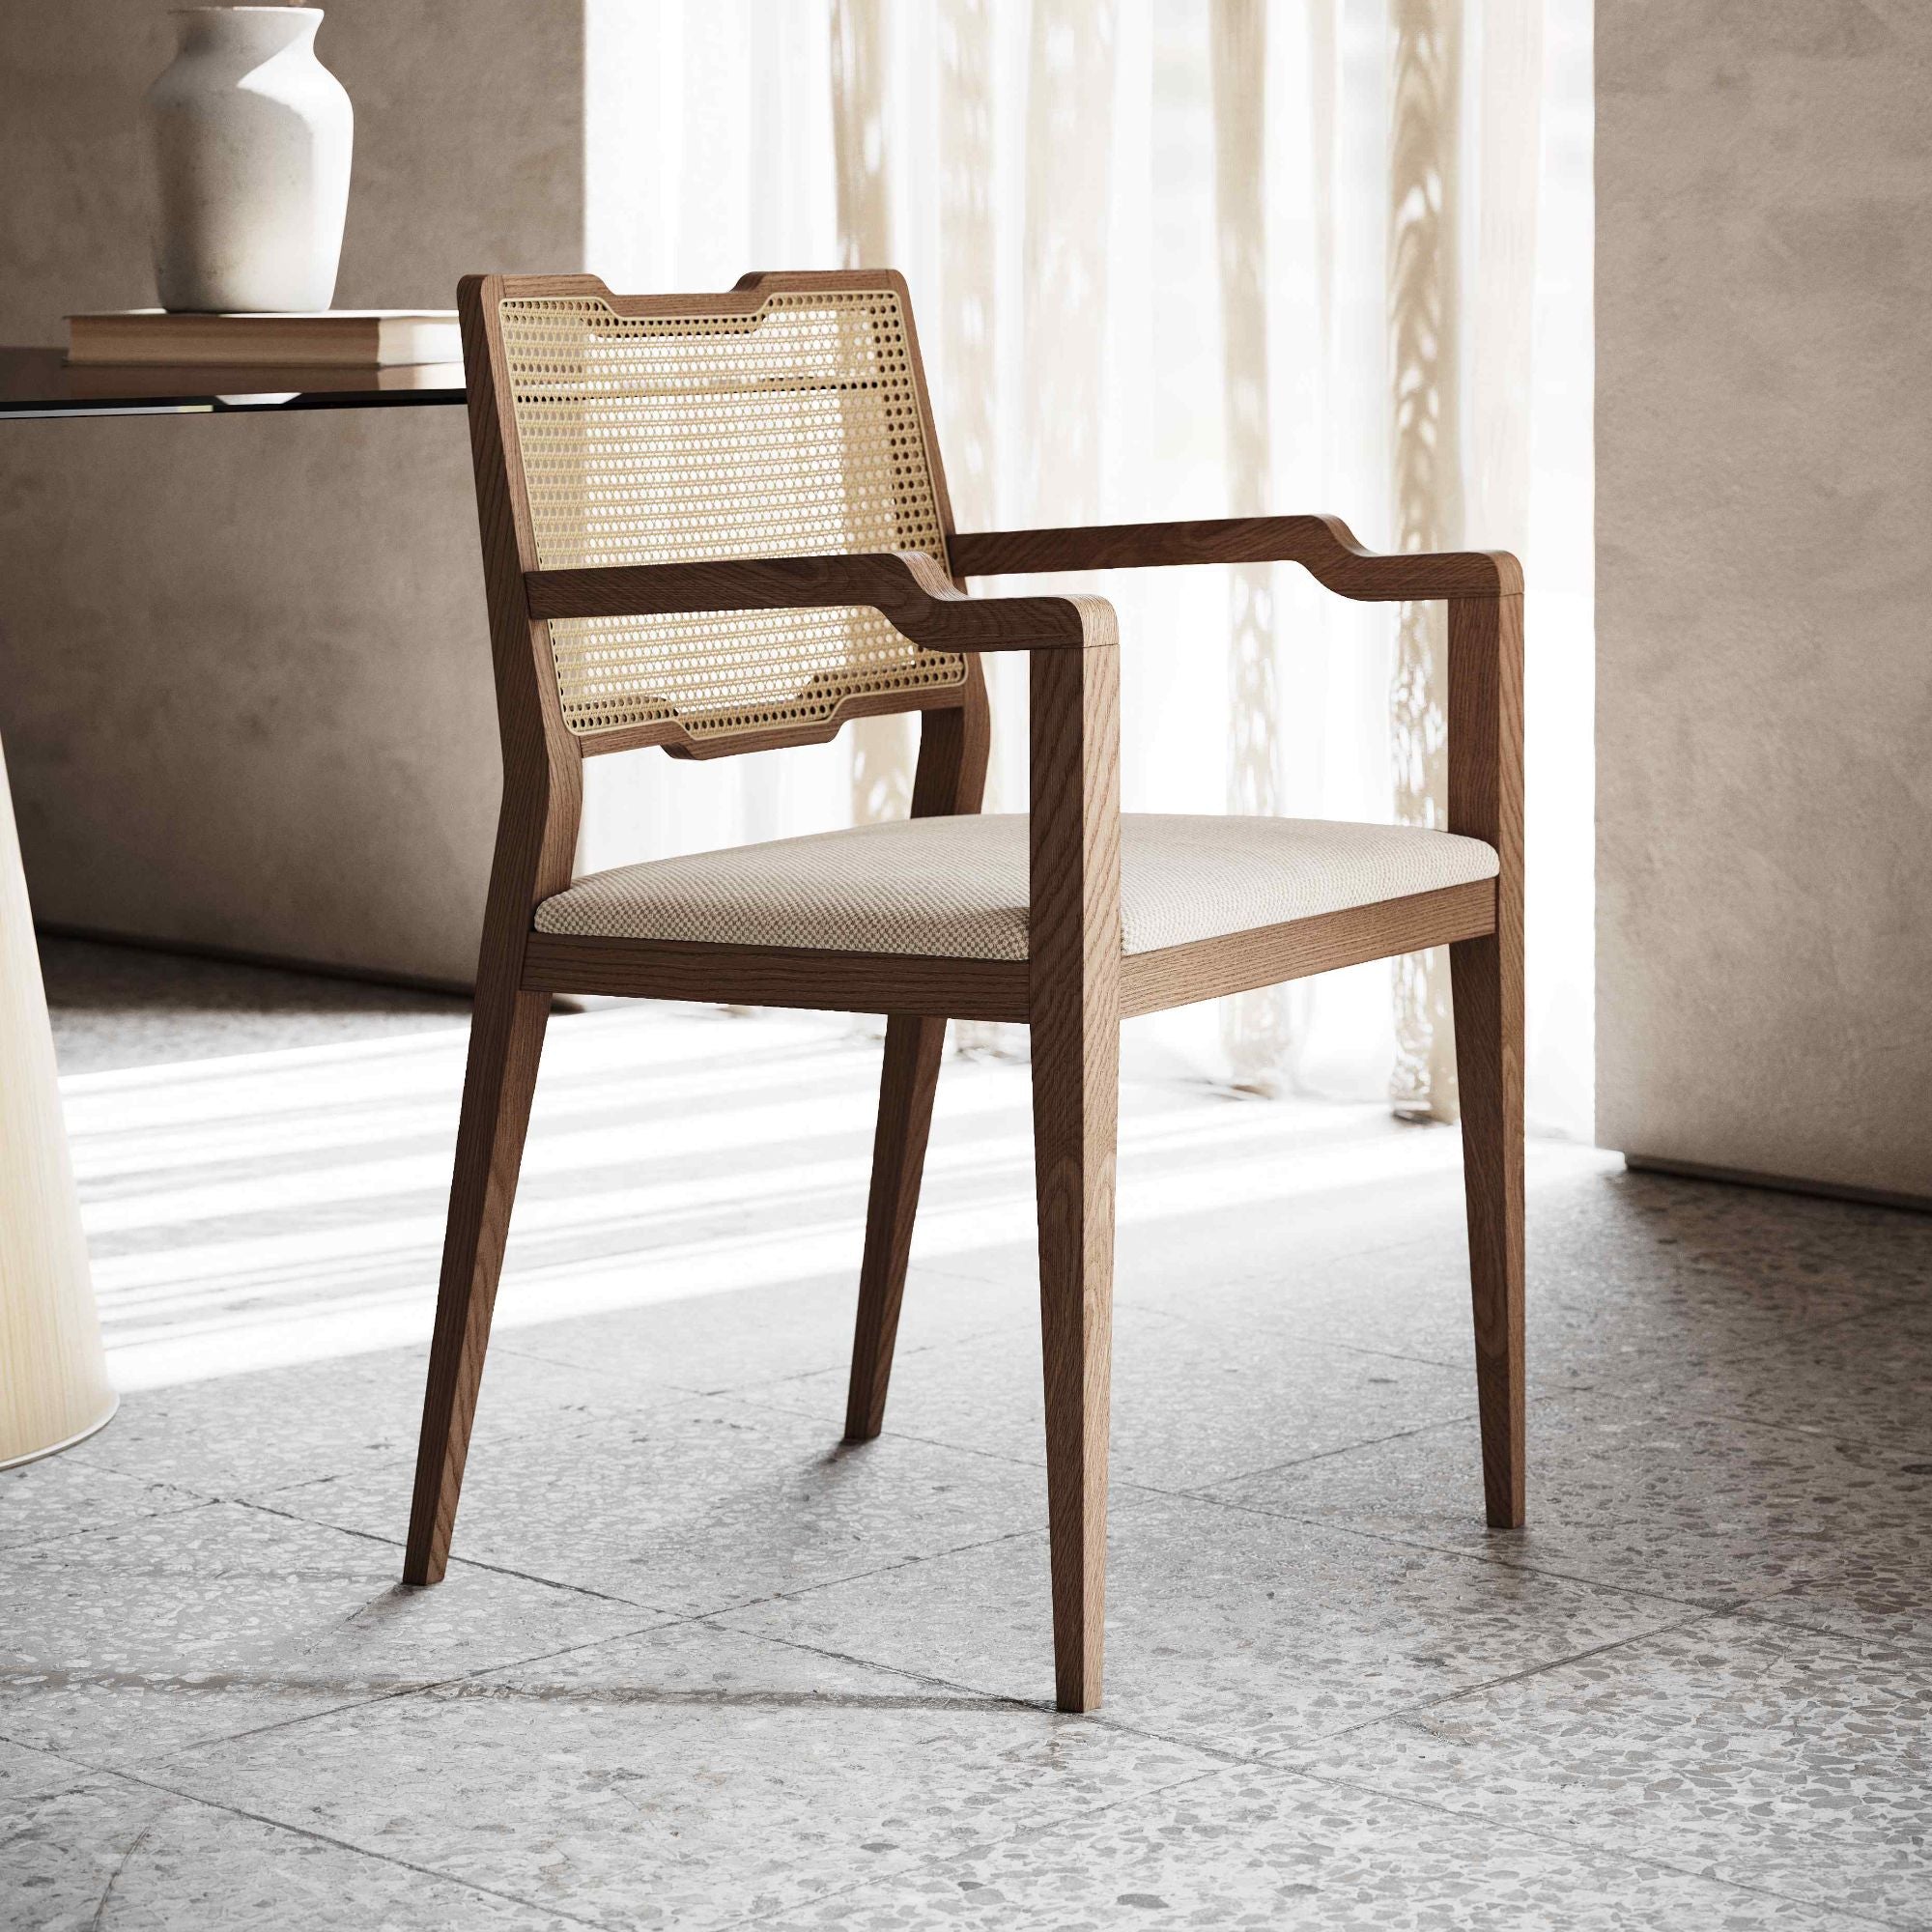 Eva Chair With Armrests - THAT COOL LIVING